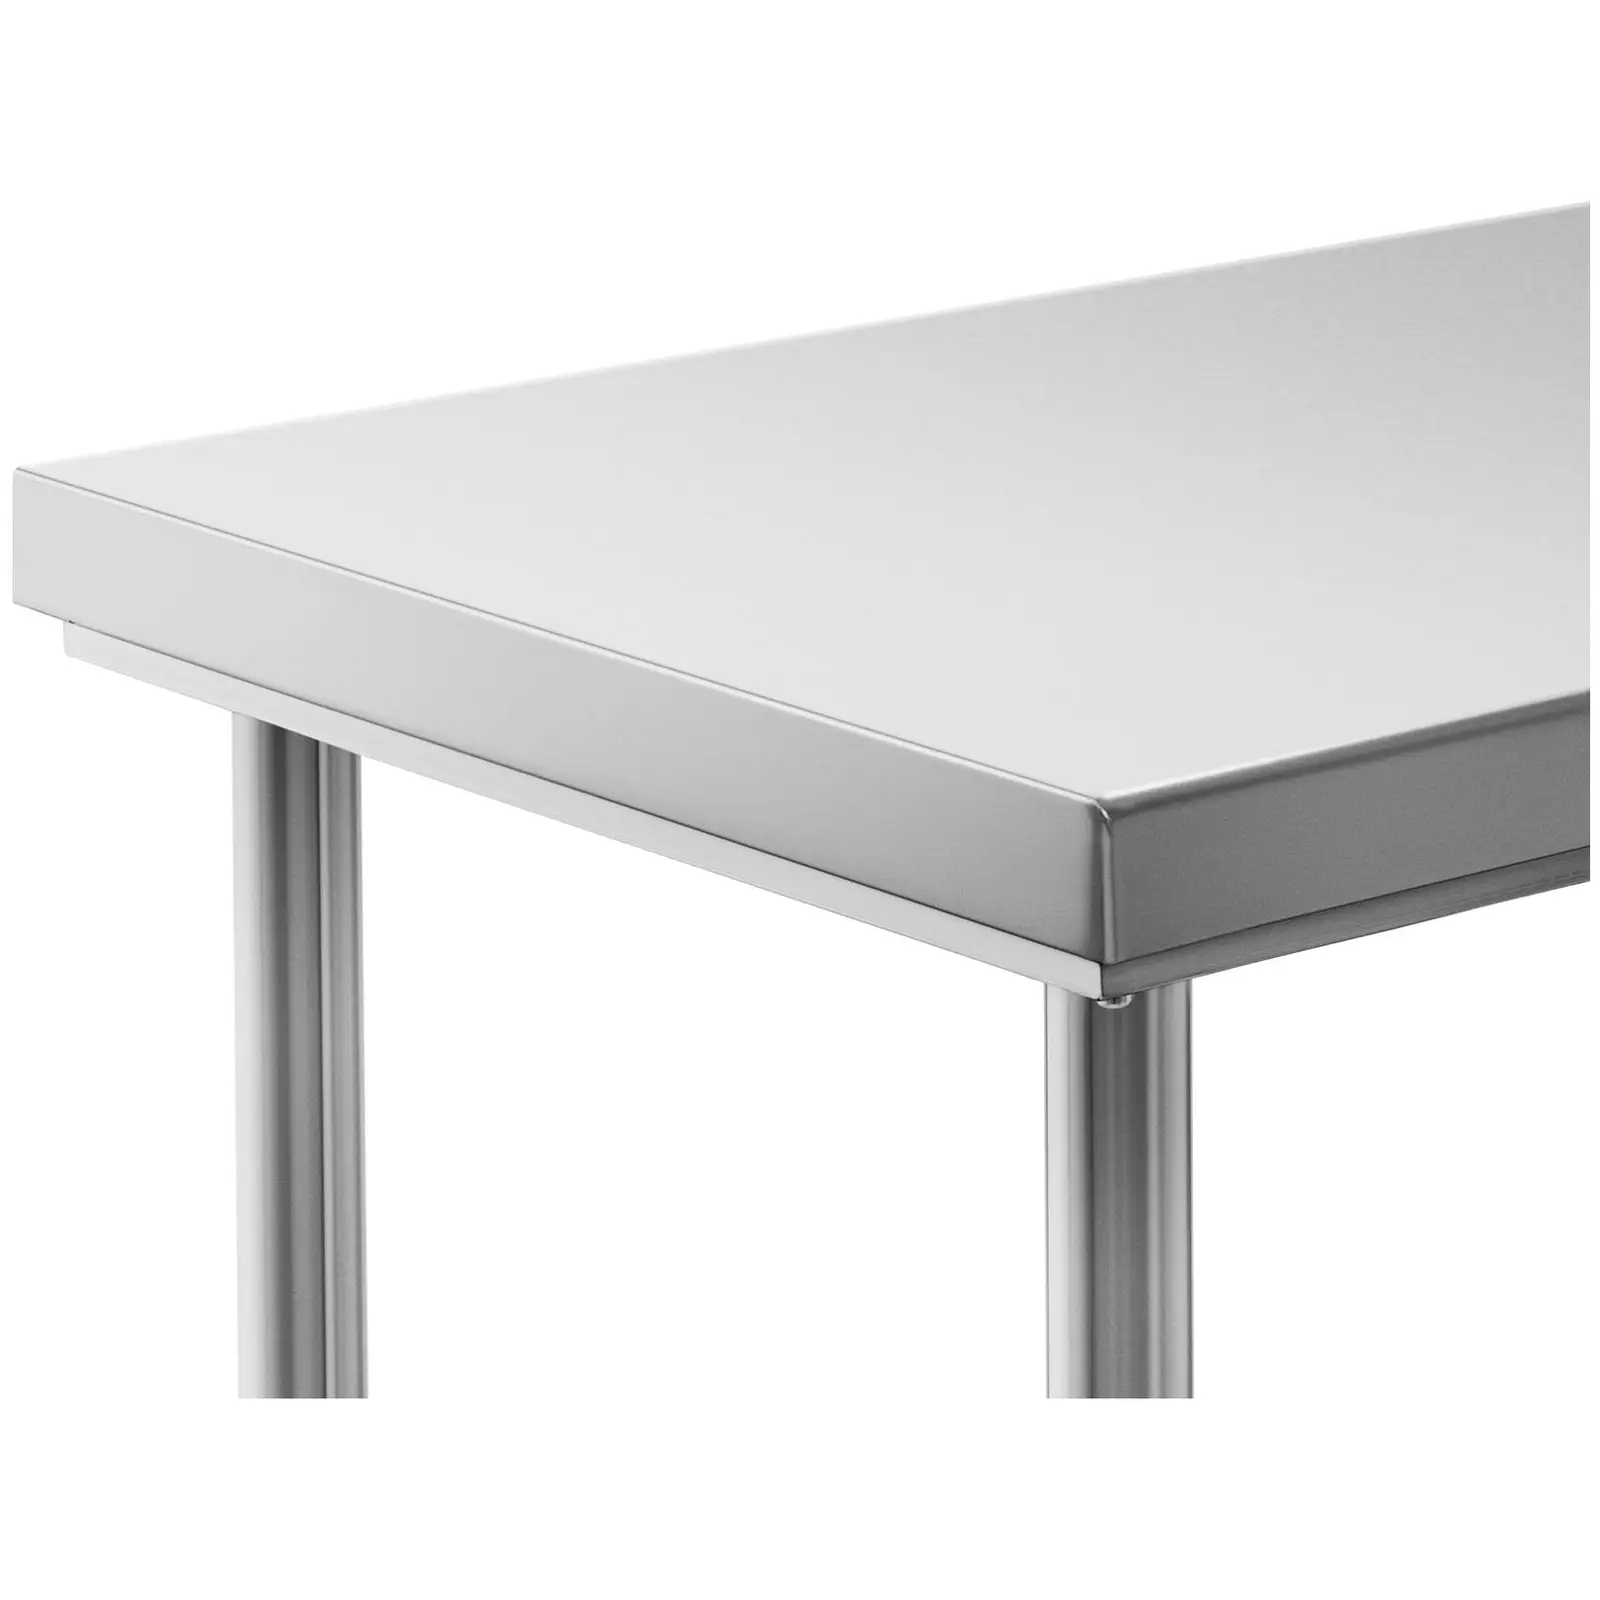 Stainless Steel Work Table - 100 x 60 cm - 186 kg load capacity - Royal Catering